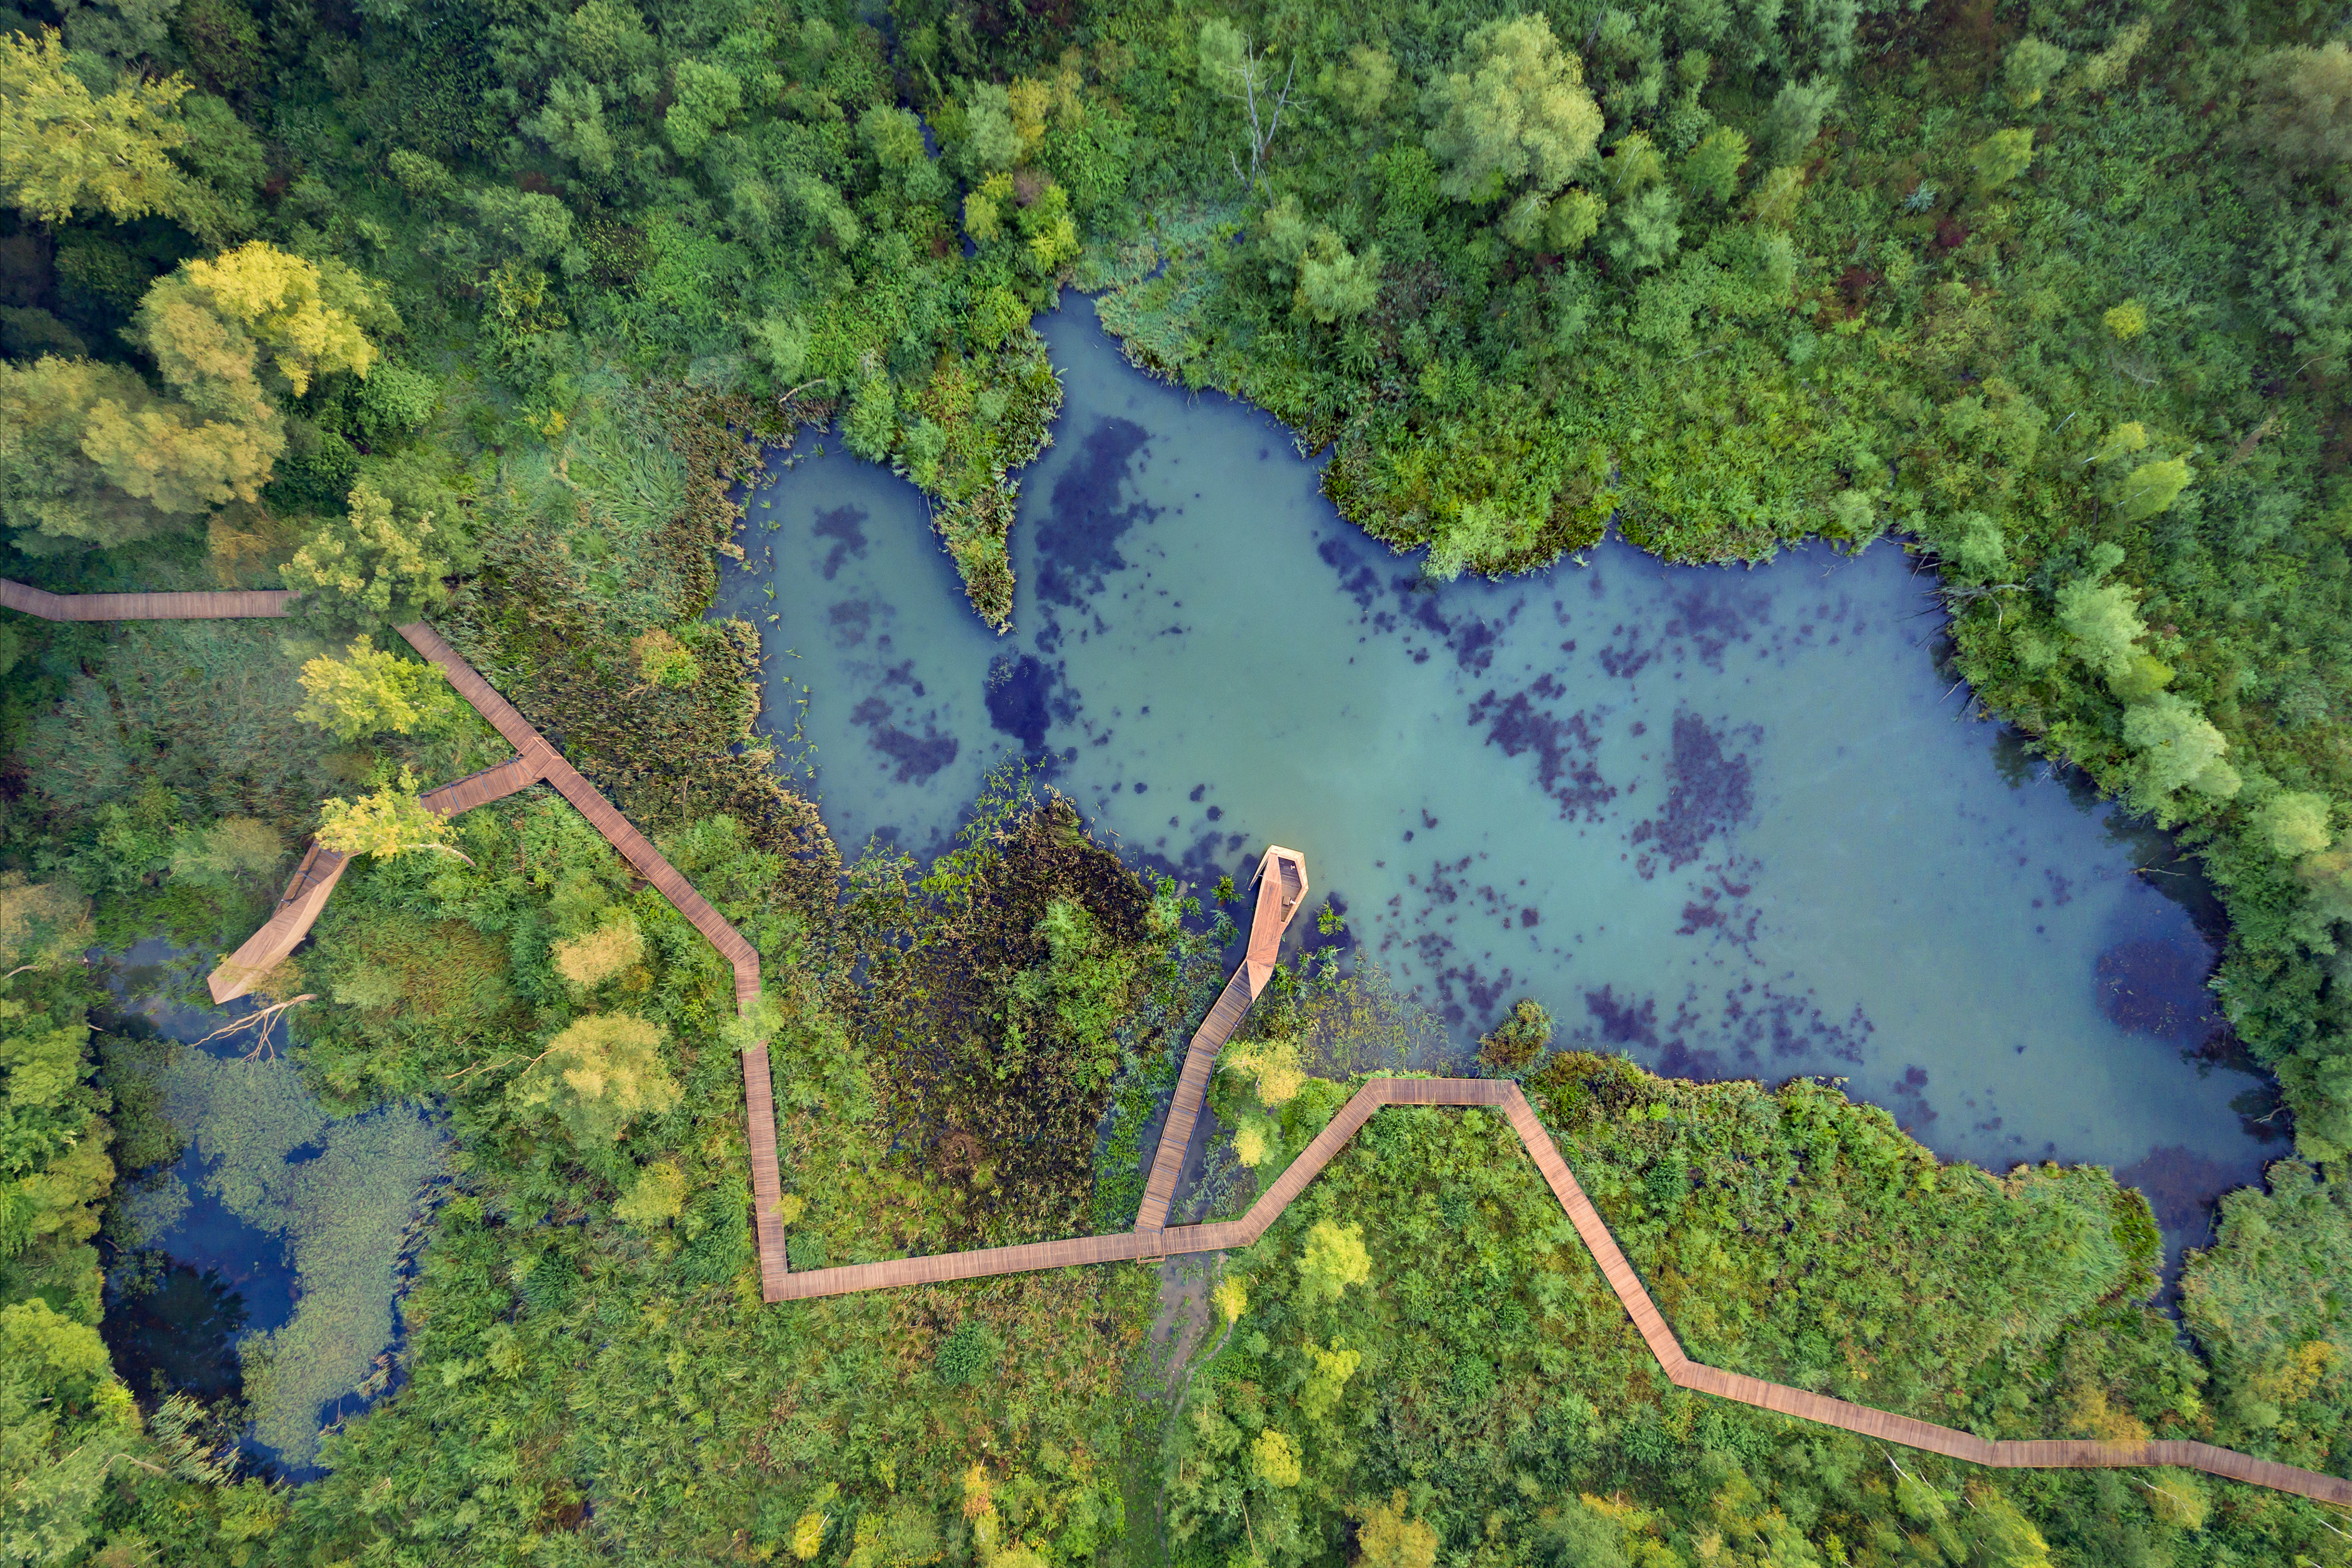 The photograph presents a top view of the "Bobrowisko" nature enclave in malopolska region.